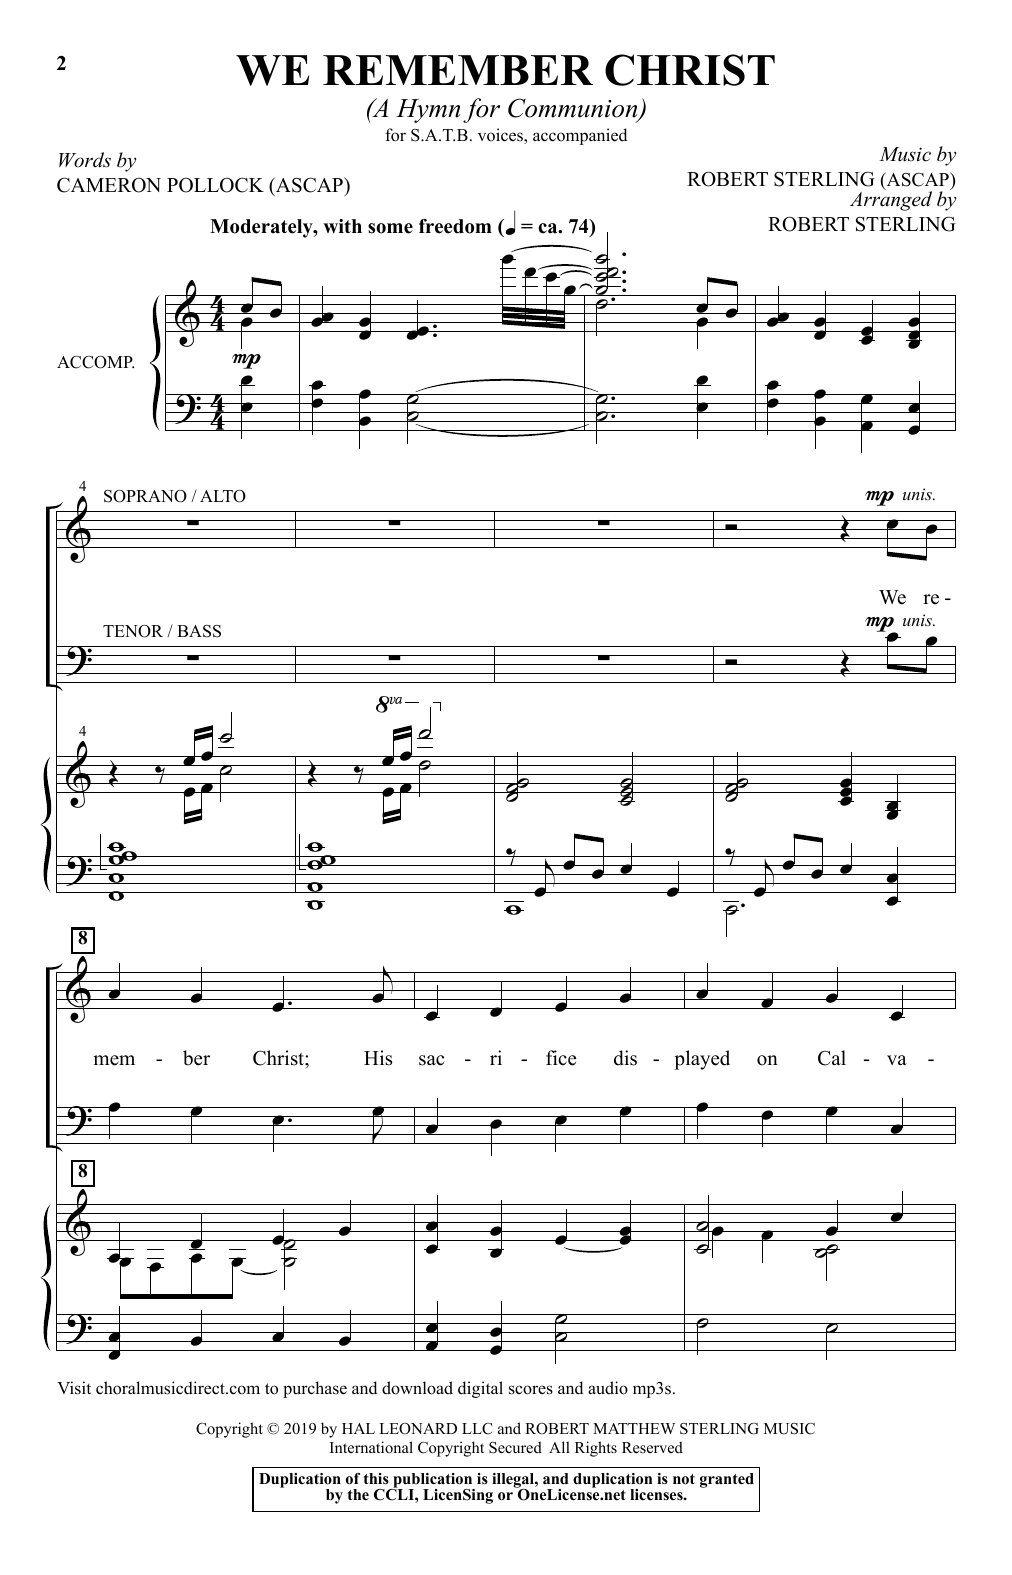 Download Cameron Pollock & Robert Sterling We Remember Christ (A Hymn For Communio Sheet Music